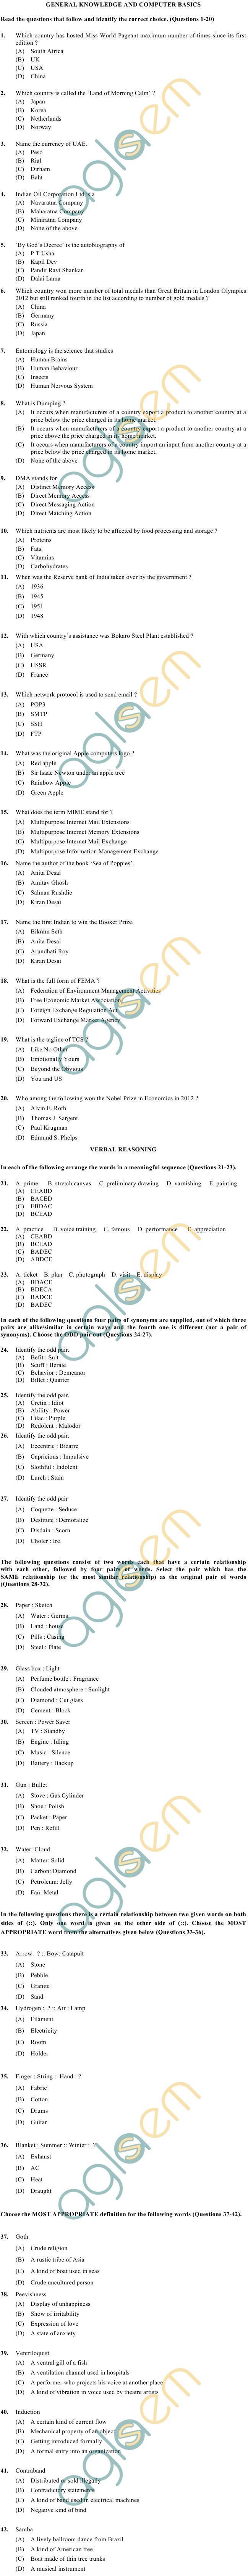 OJEE 2013 Question Paper for MBA